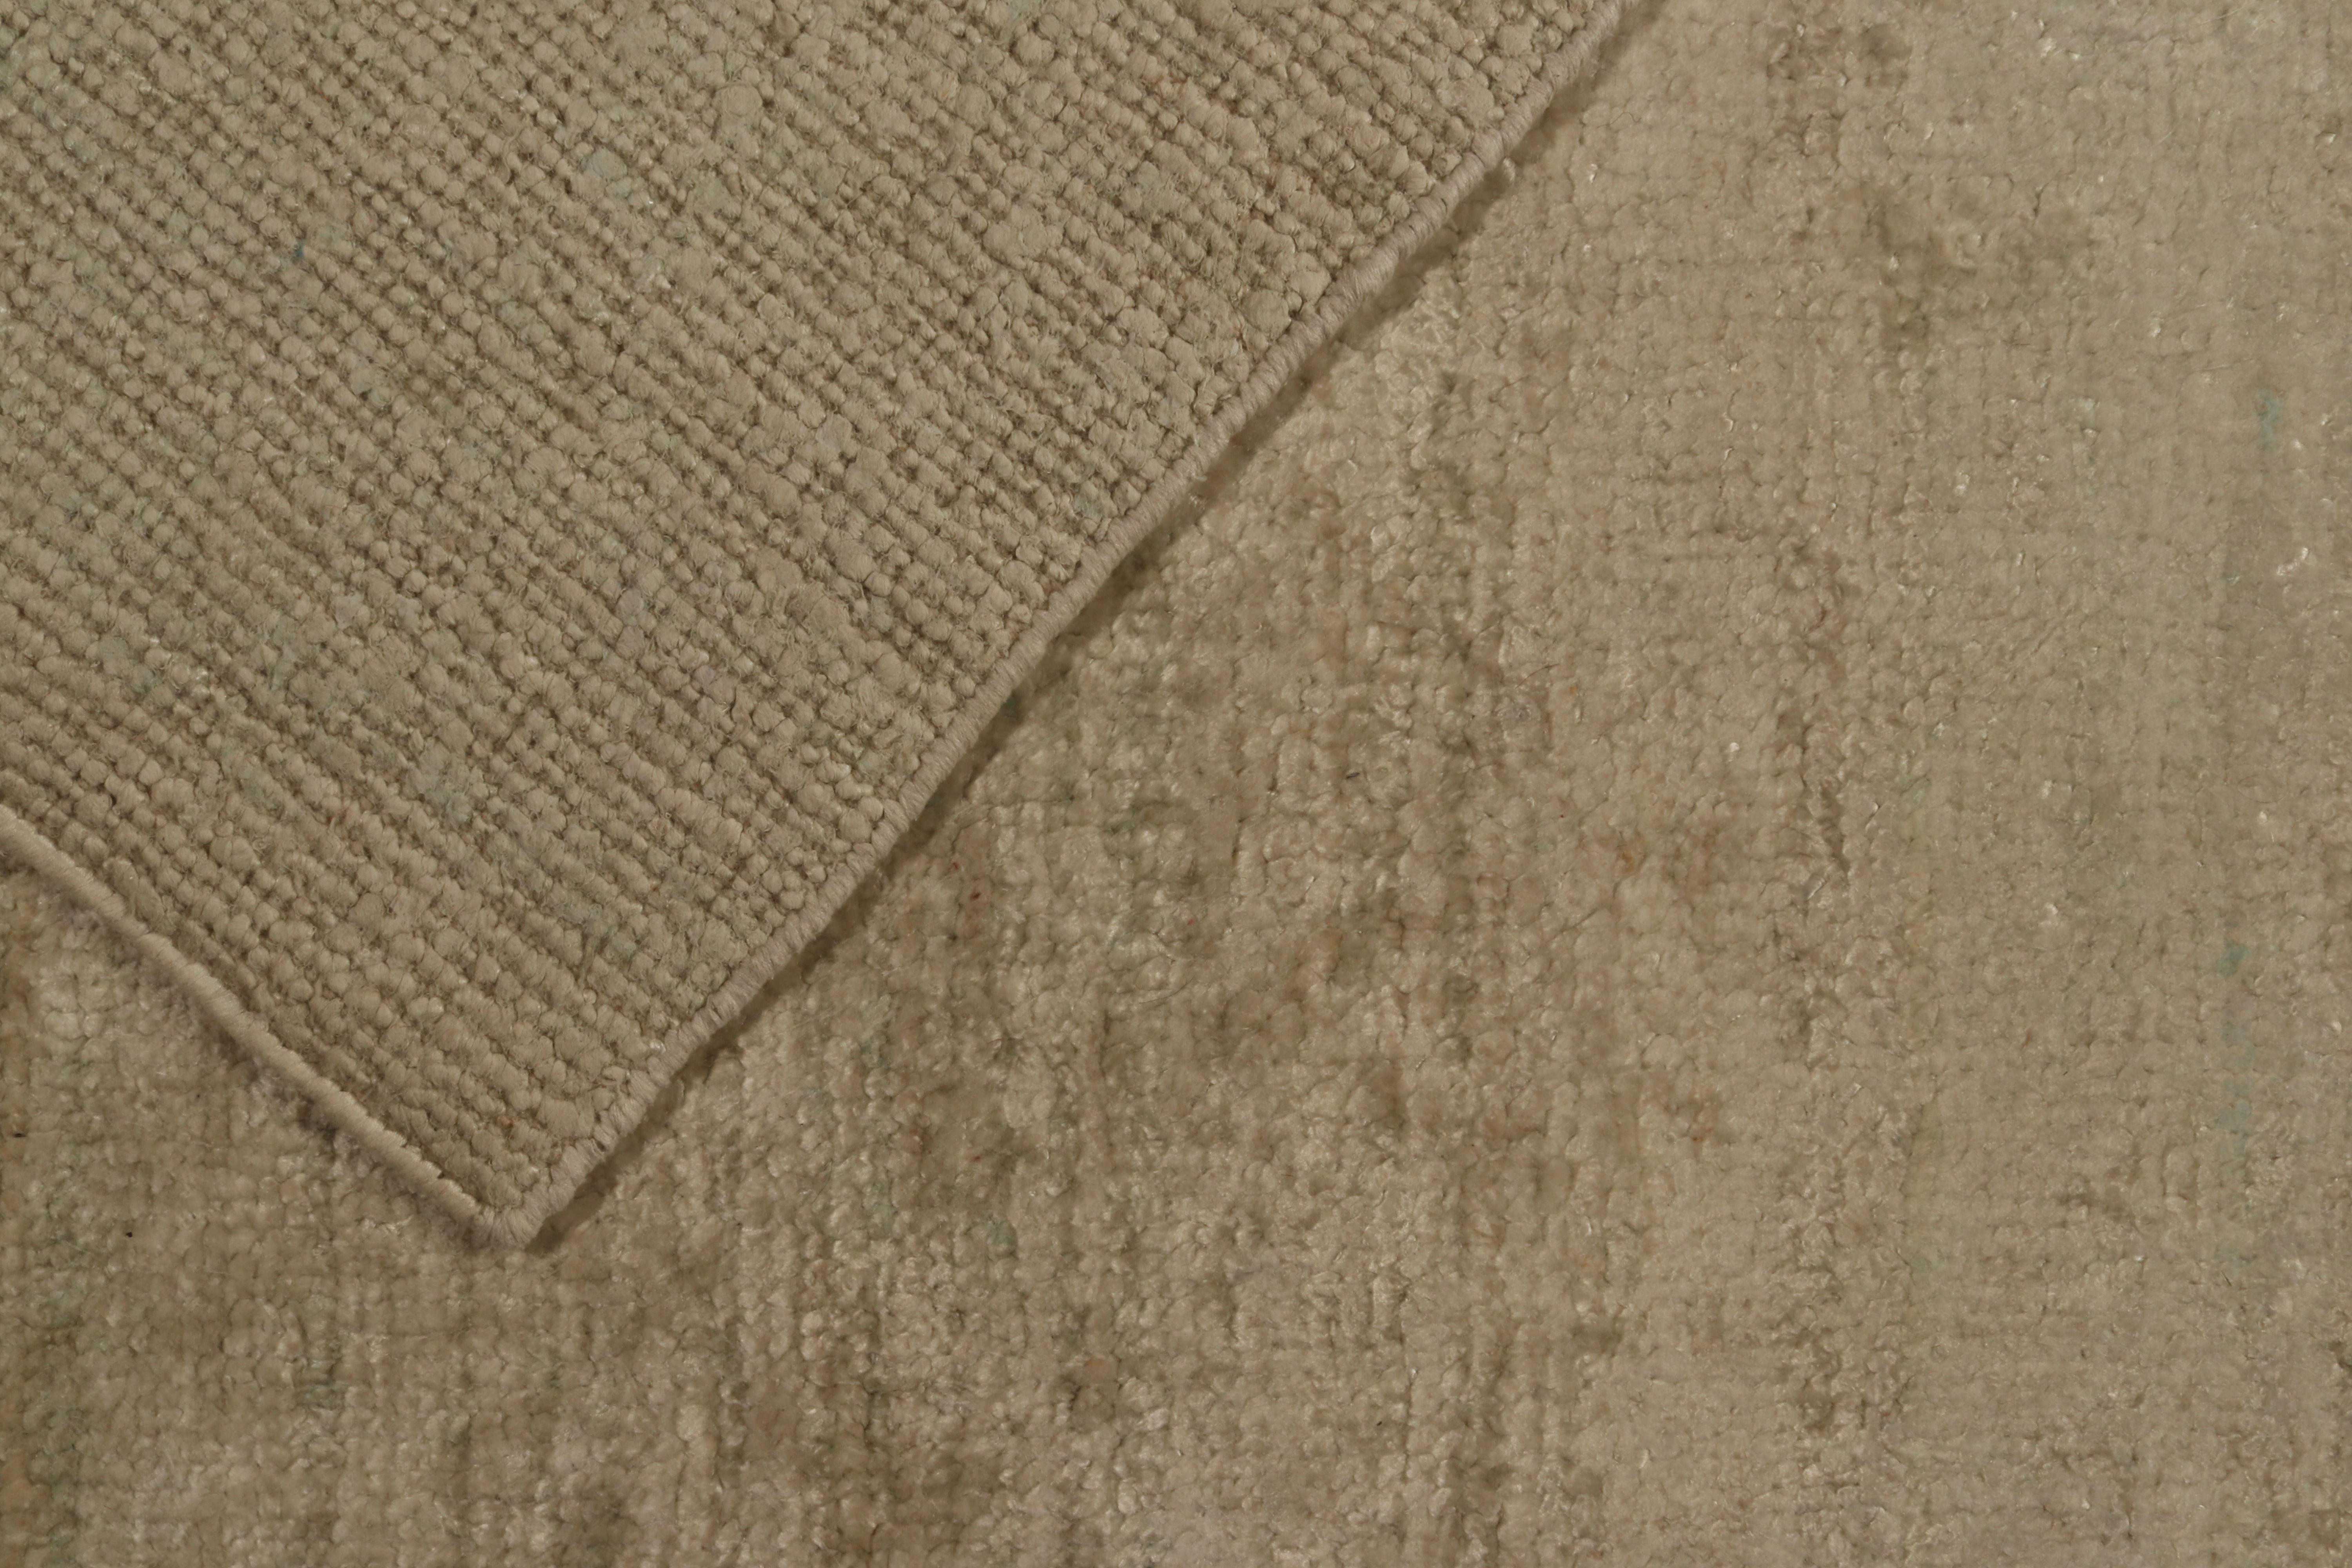 Rug & Kilim’s Solid Beige Rug in Tone-on-tone Hand-Knotted Silk Striae For Sale 1